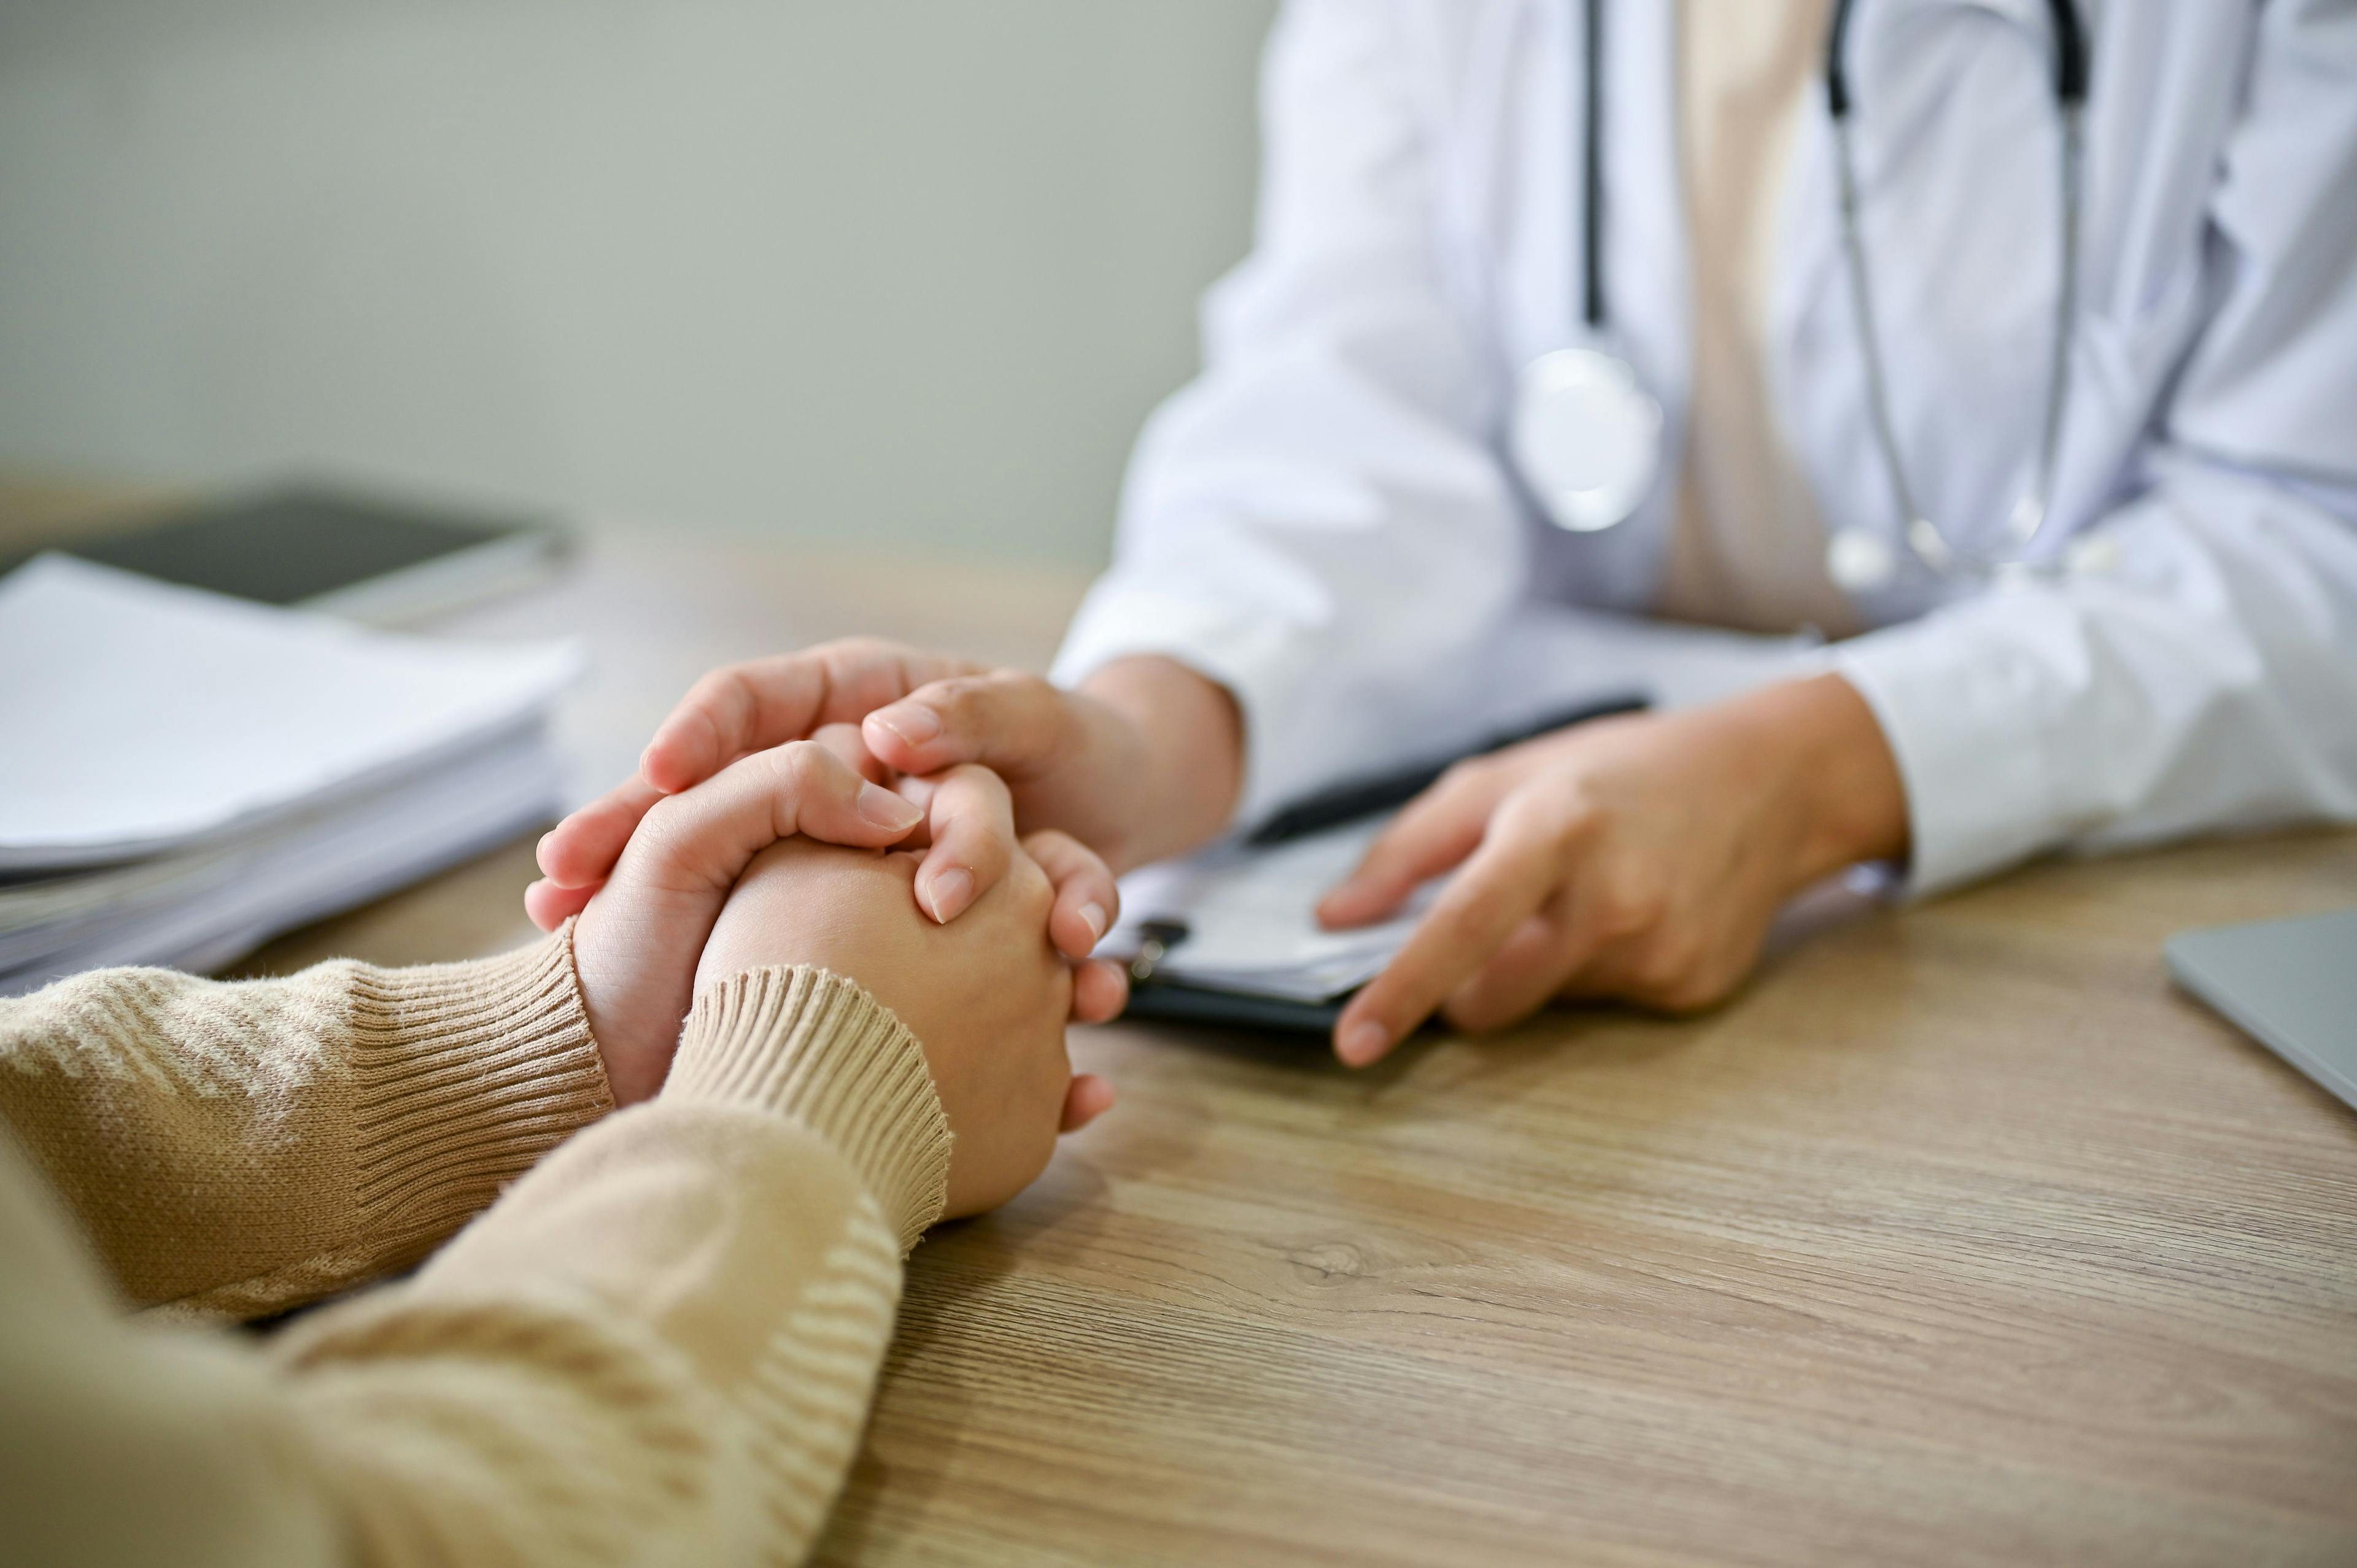 Close up view of doctor touching patient hand, showing empathy and kindness | Image credit: bongkarn - stock.adobe.com